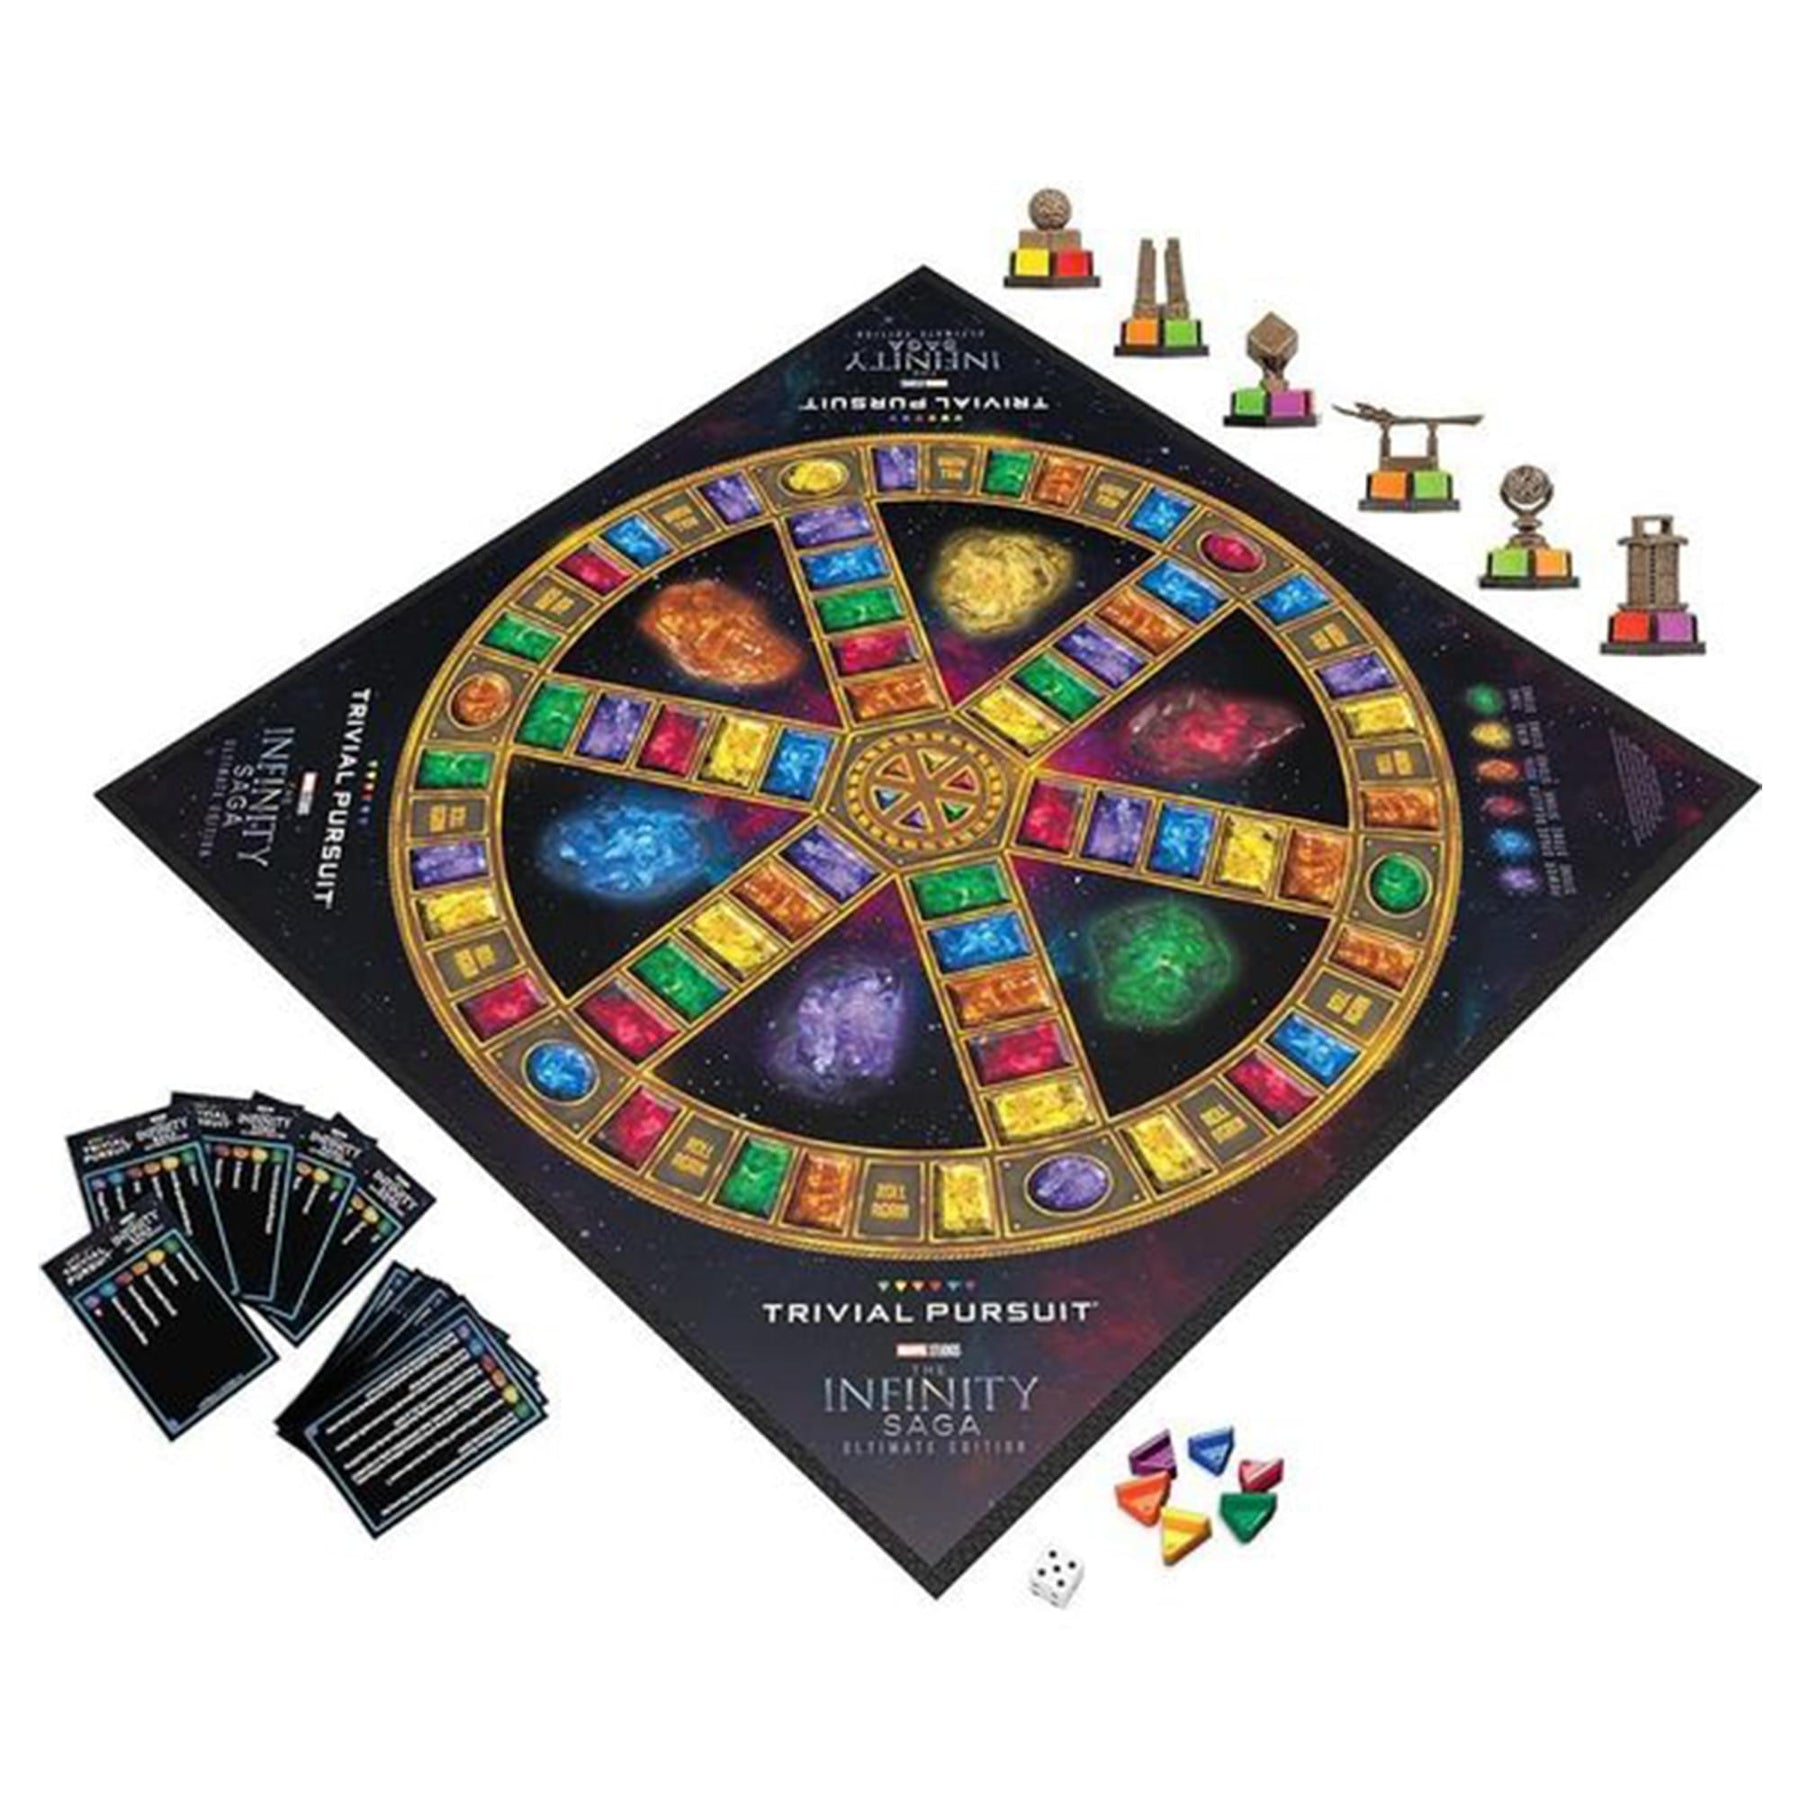 TRIVIAL PURSUIT Disney For All Hasbro 2011 Board Game